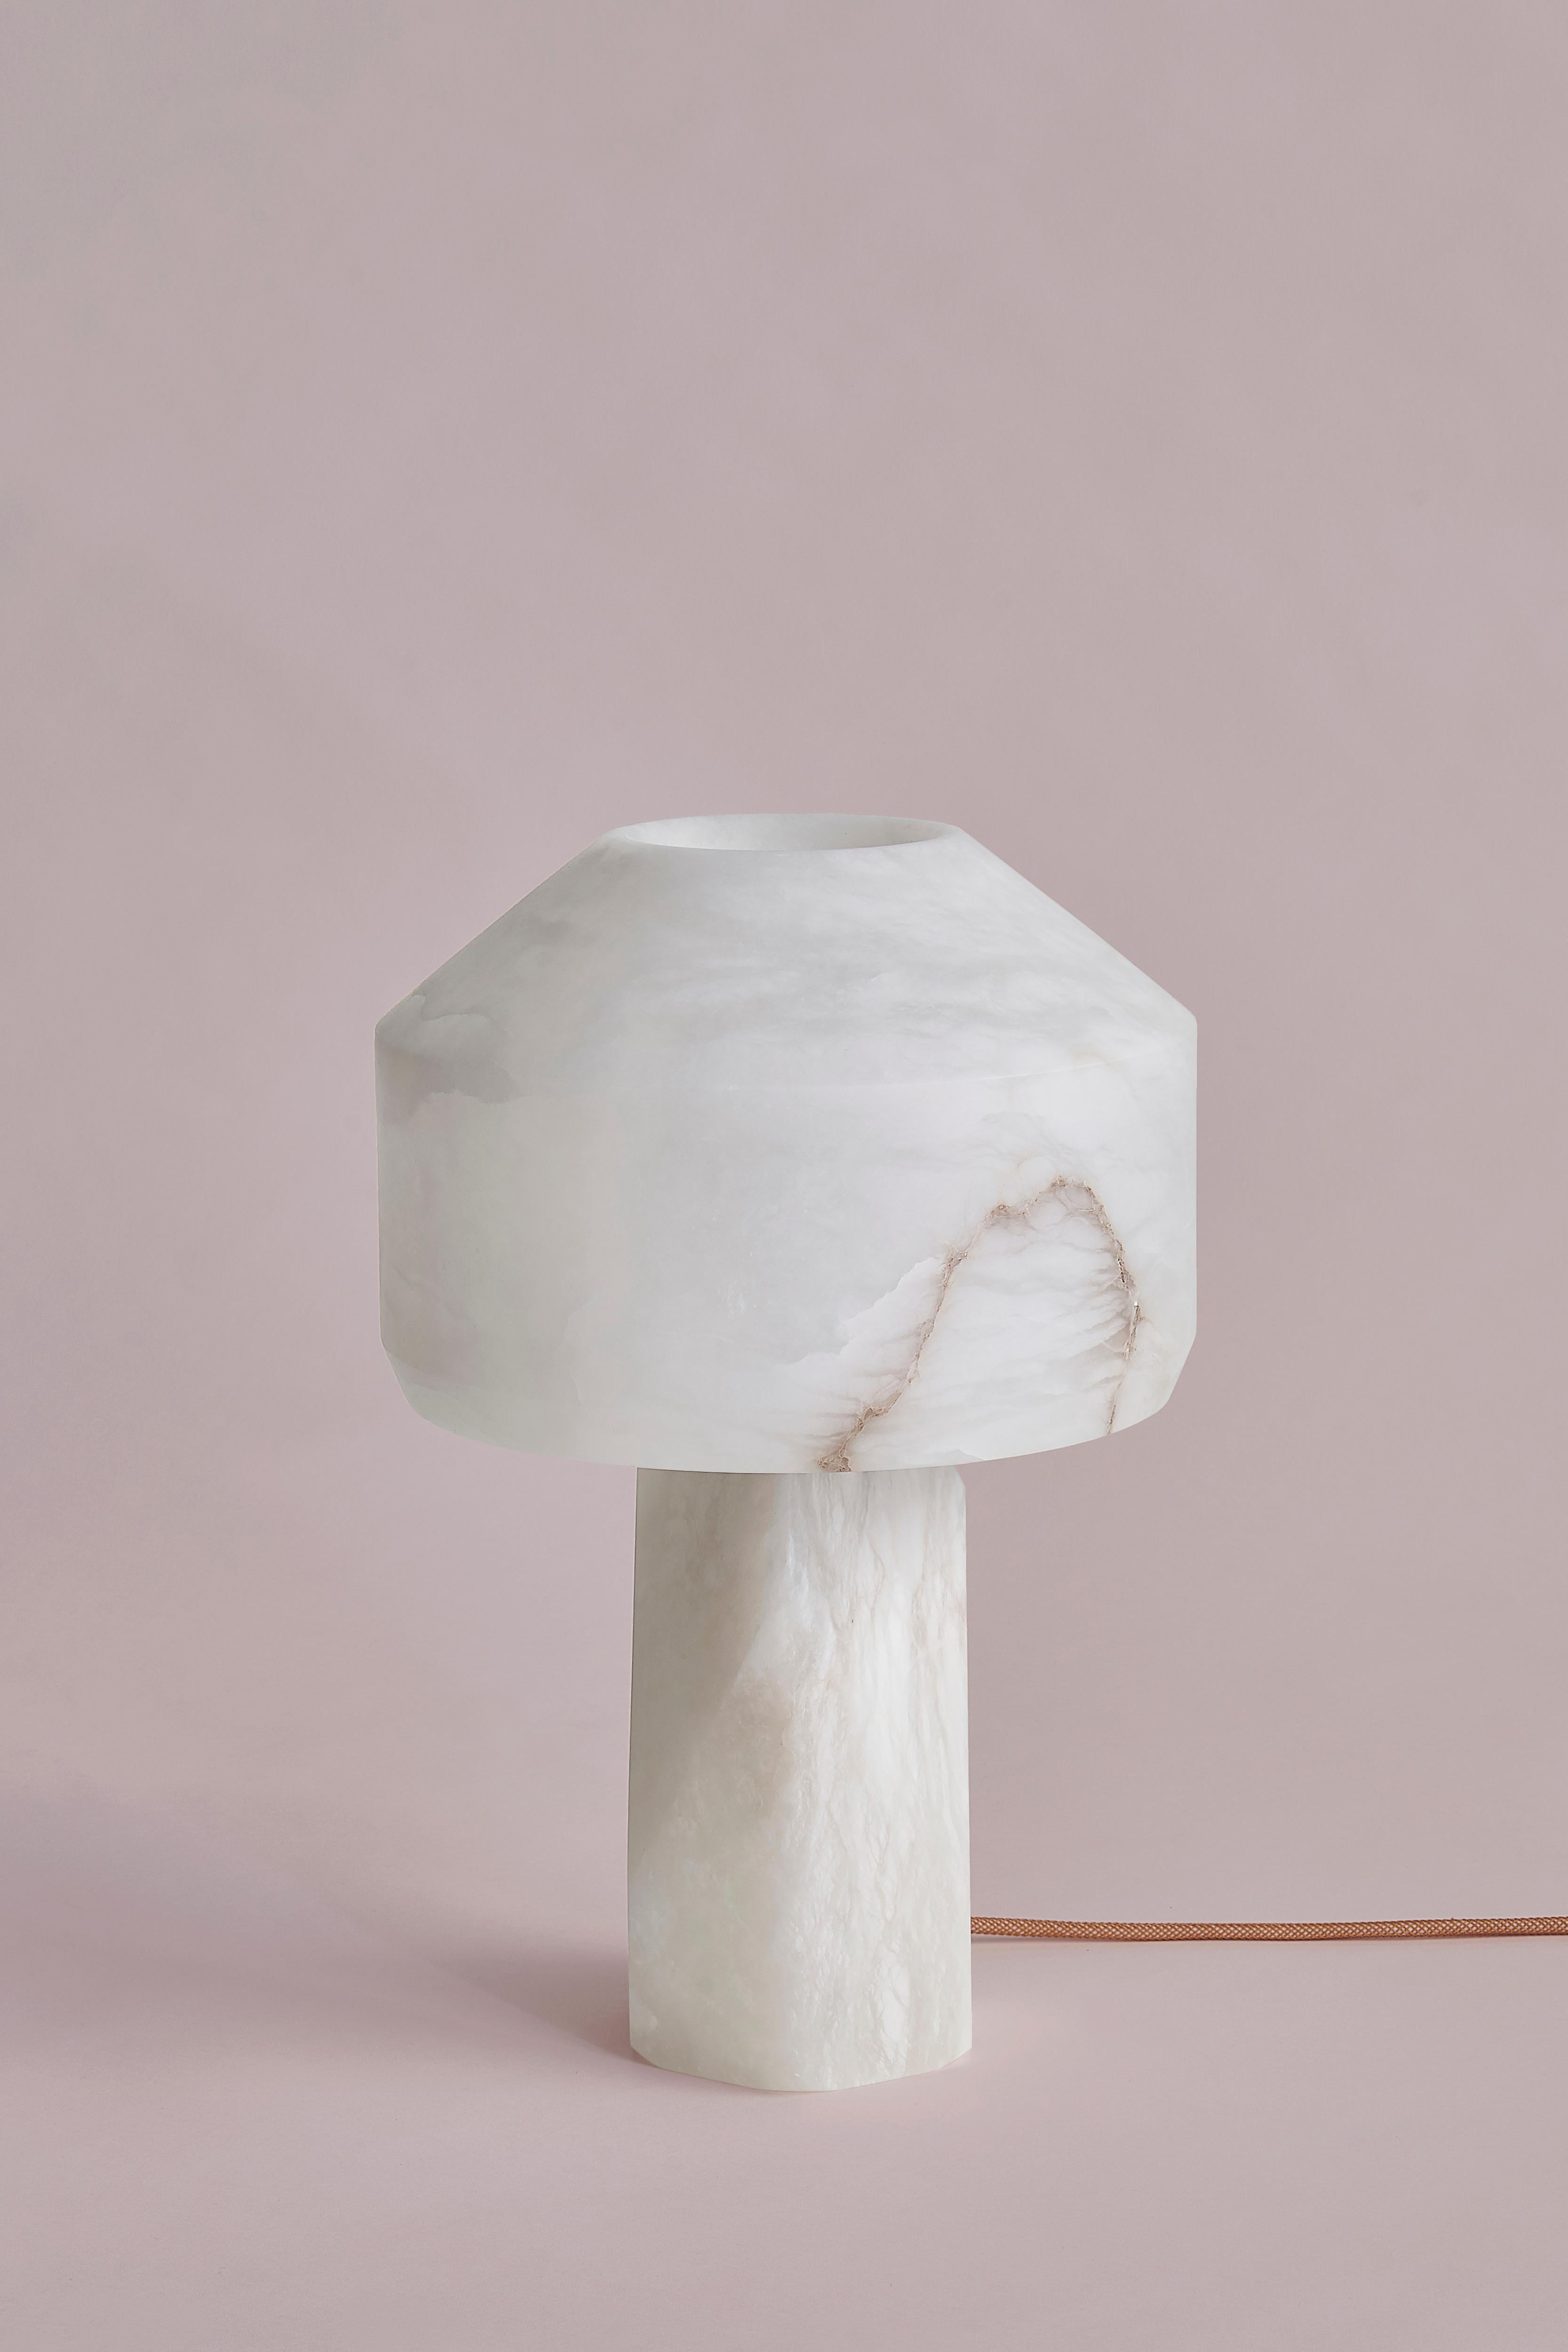 Dot Table Lamp by SB26
Dimensions: W 29 x D 29 x H 43 cm
Materials: Alabaster, LED Source.

In a consistently geometric vocabulary, this family of lamps unveils the
translucent and organic nature of alabaster.
A contrast of shapes and